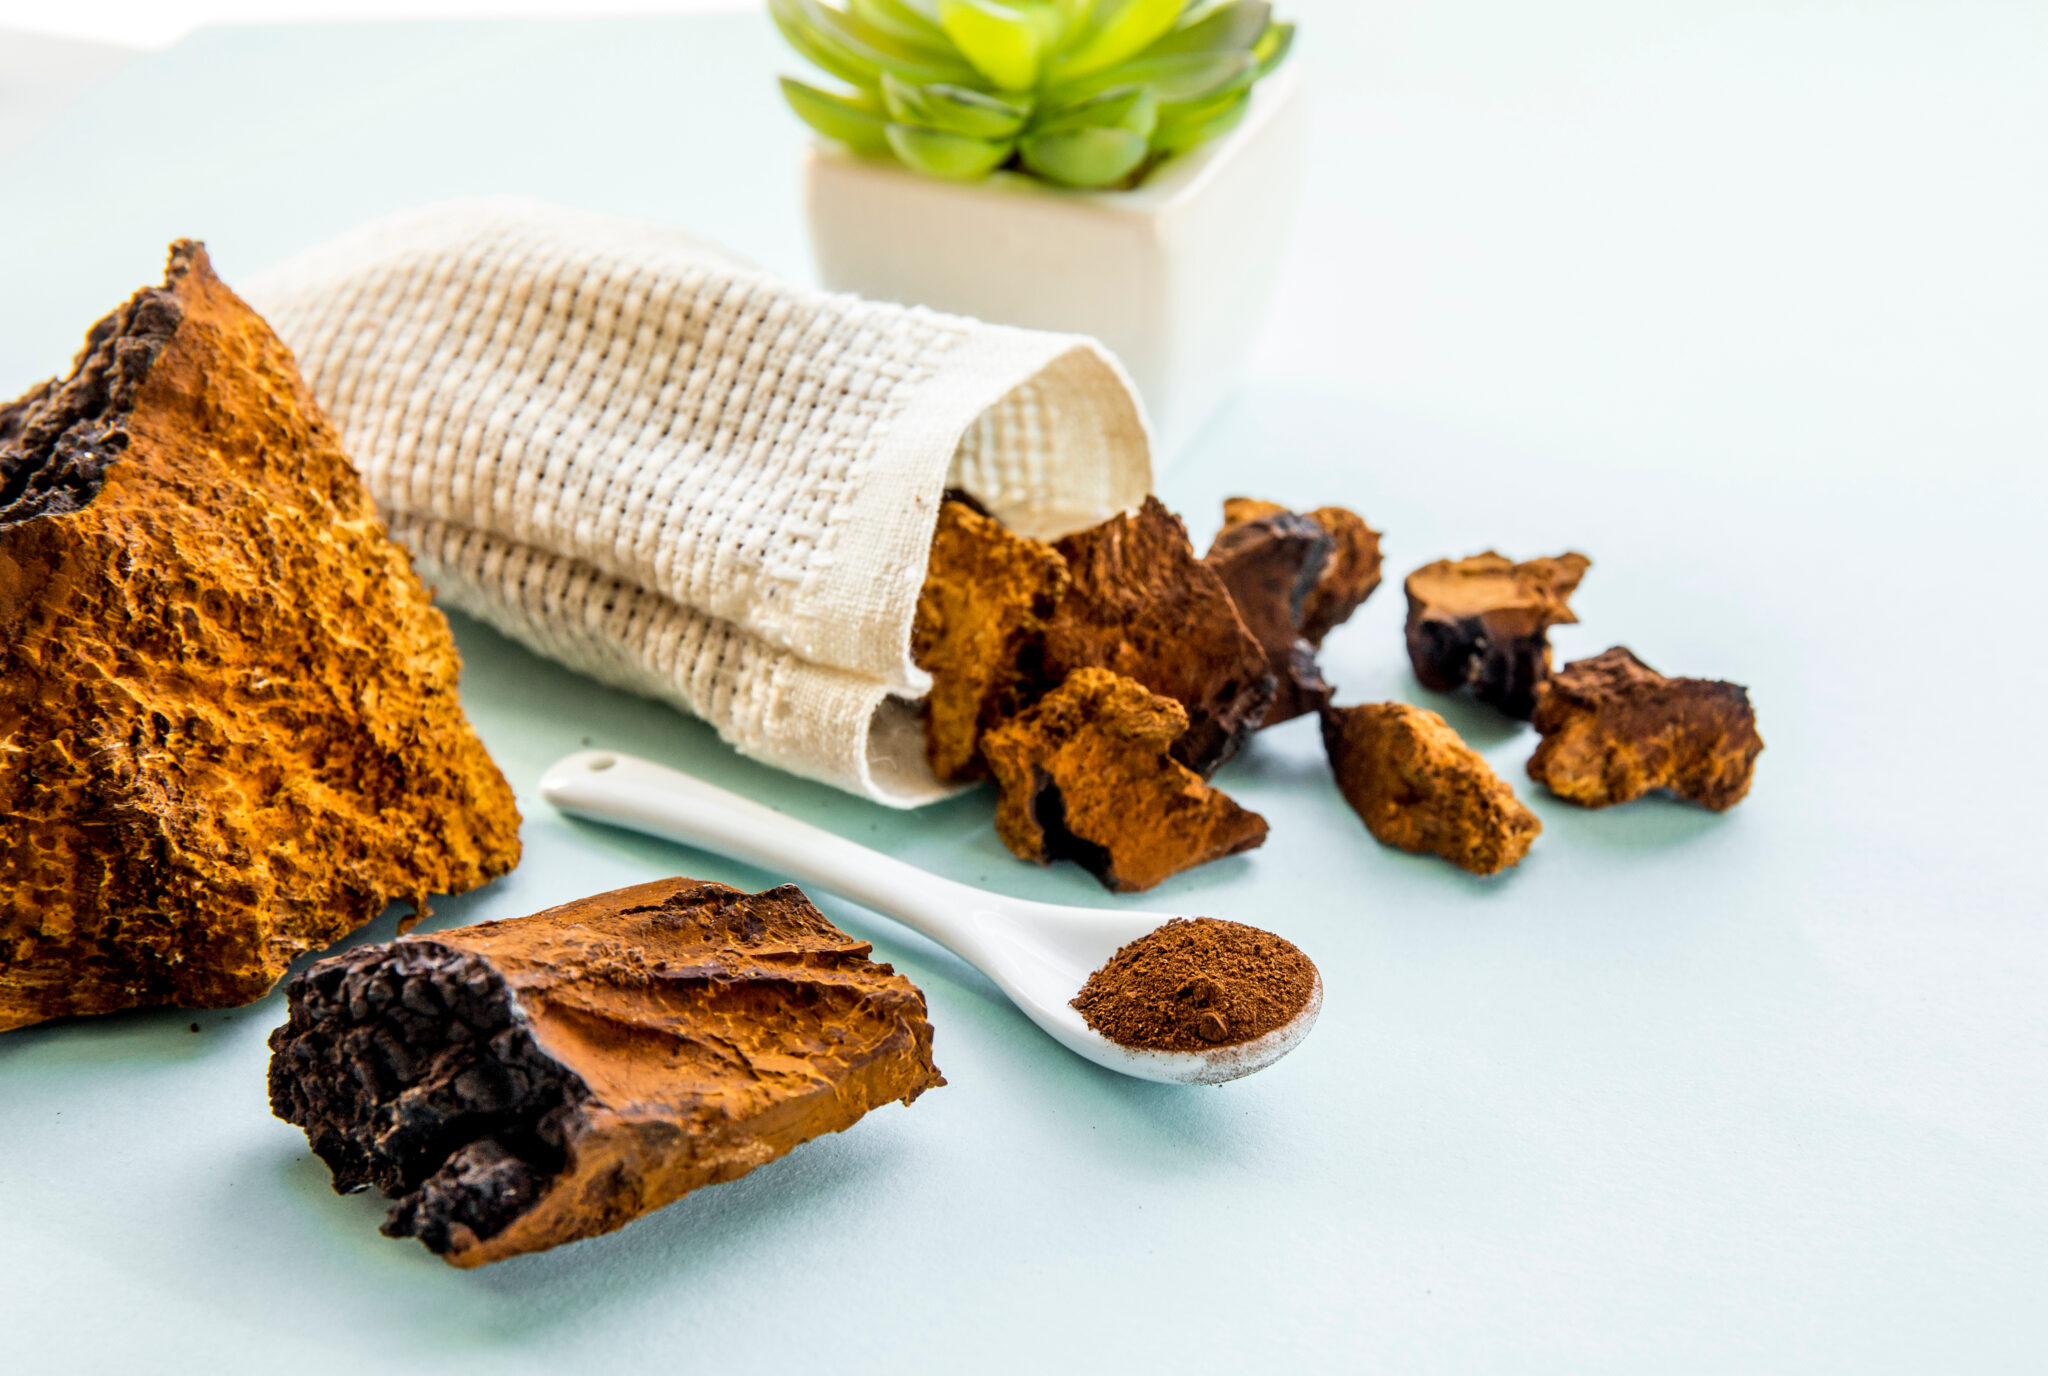 Comprehensive Guide on the Benefits of Chaga Functional Mushrooms